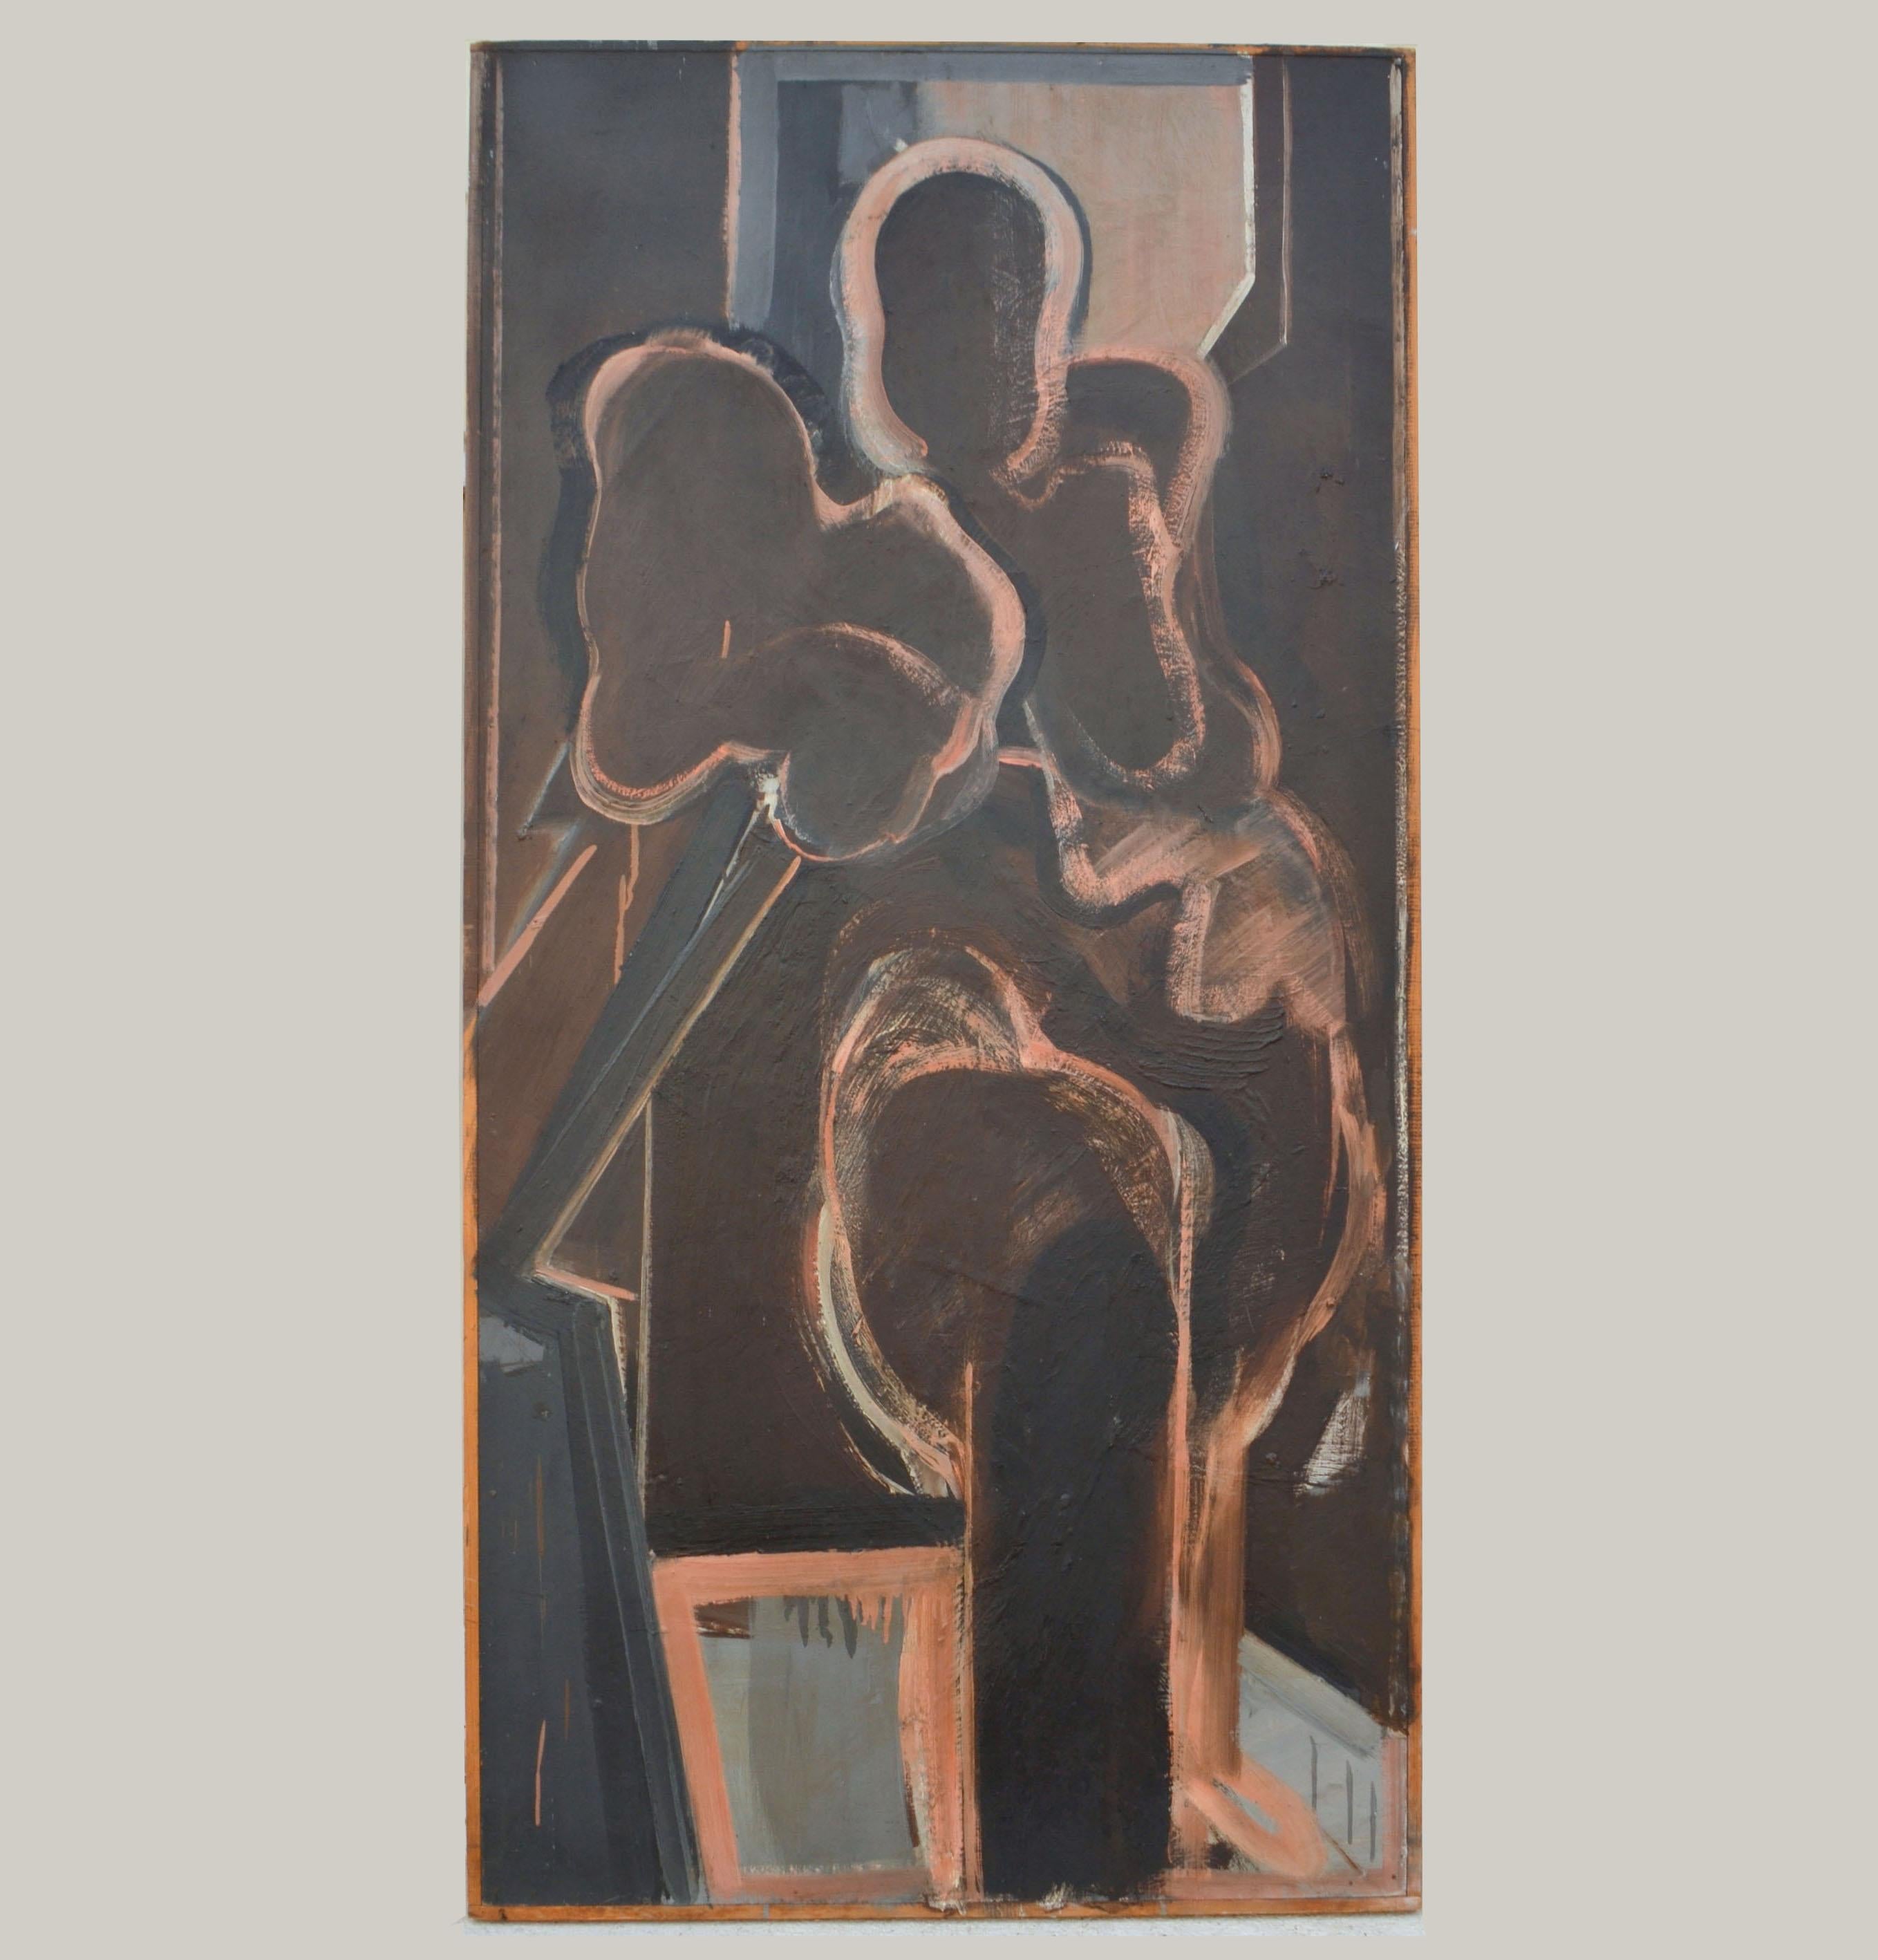 The abstract life painting of a standing or kneeling figure by John Kaine 1960's Acrylic was executed on board framed with pine wood.
John Kaine presents us with a female nude in a position of action or inaction, descending or ascending. The figure